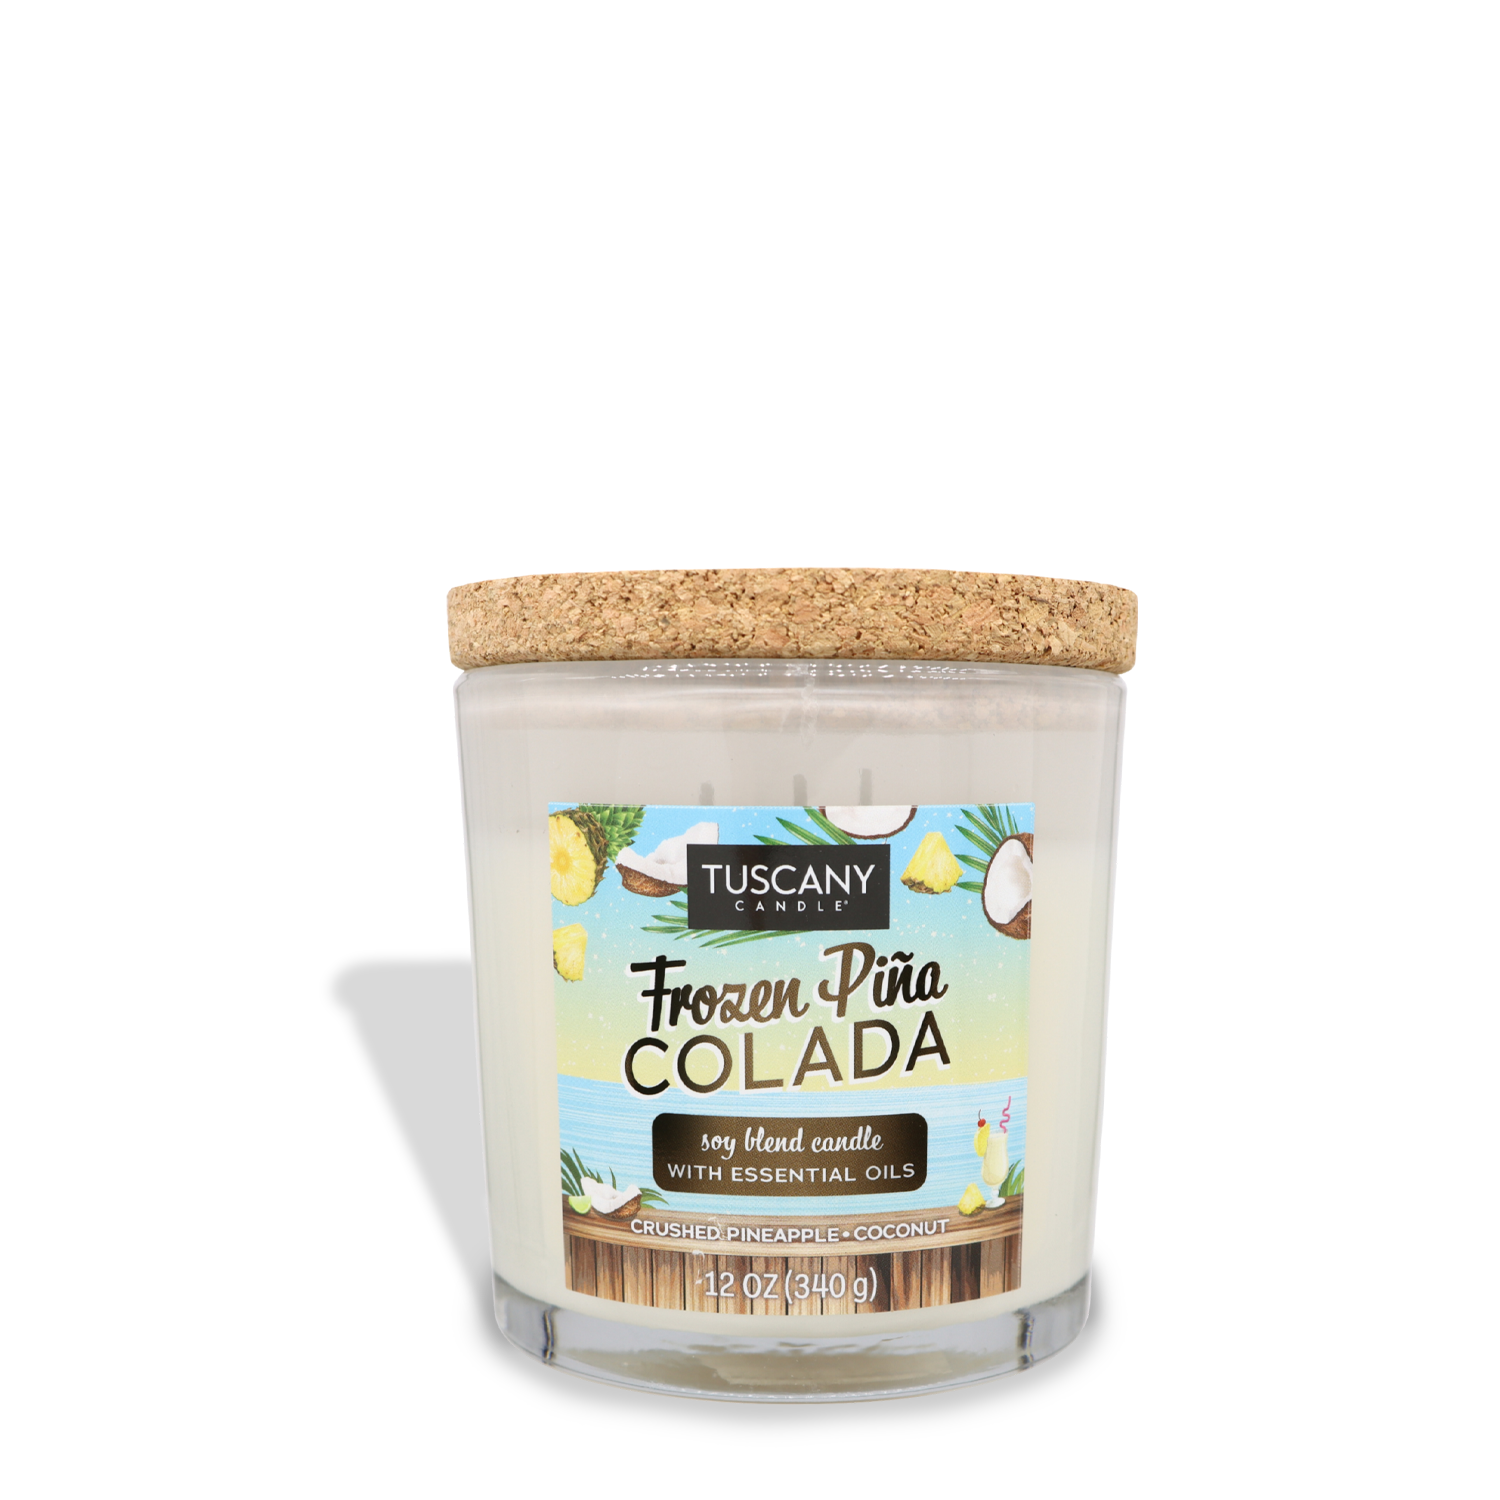 A clear glass candle jar with a cork lid, labeled "Frozen Pina Colada (12 oz) – Sunset Beach Bar Collection" by Tuscany Candle® SEASONAL. The candle features scents of soft coconut and crushed pineapple, evoking a tropical paradise. It has a net weight of 12 ounces (340 grams).